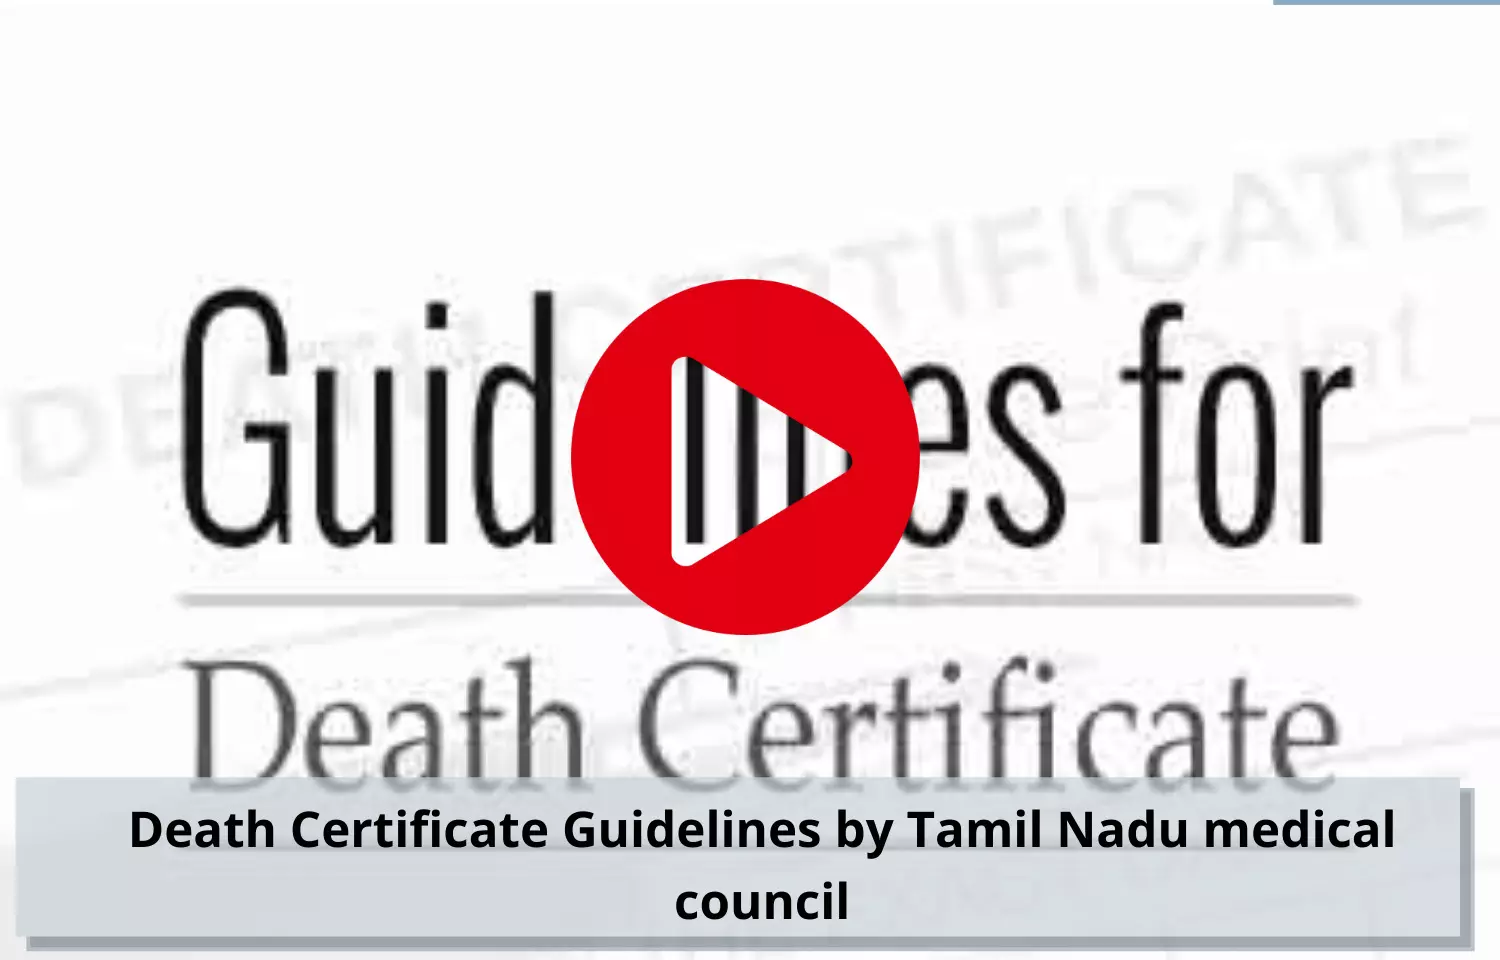 Tamil Nadu Medical Council issues Death certificate guidelines